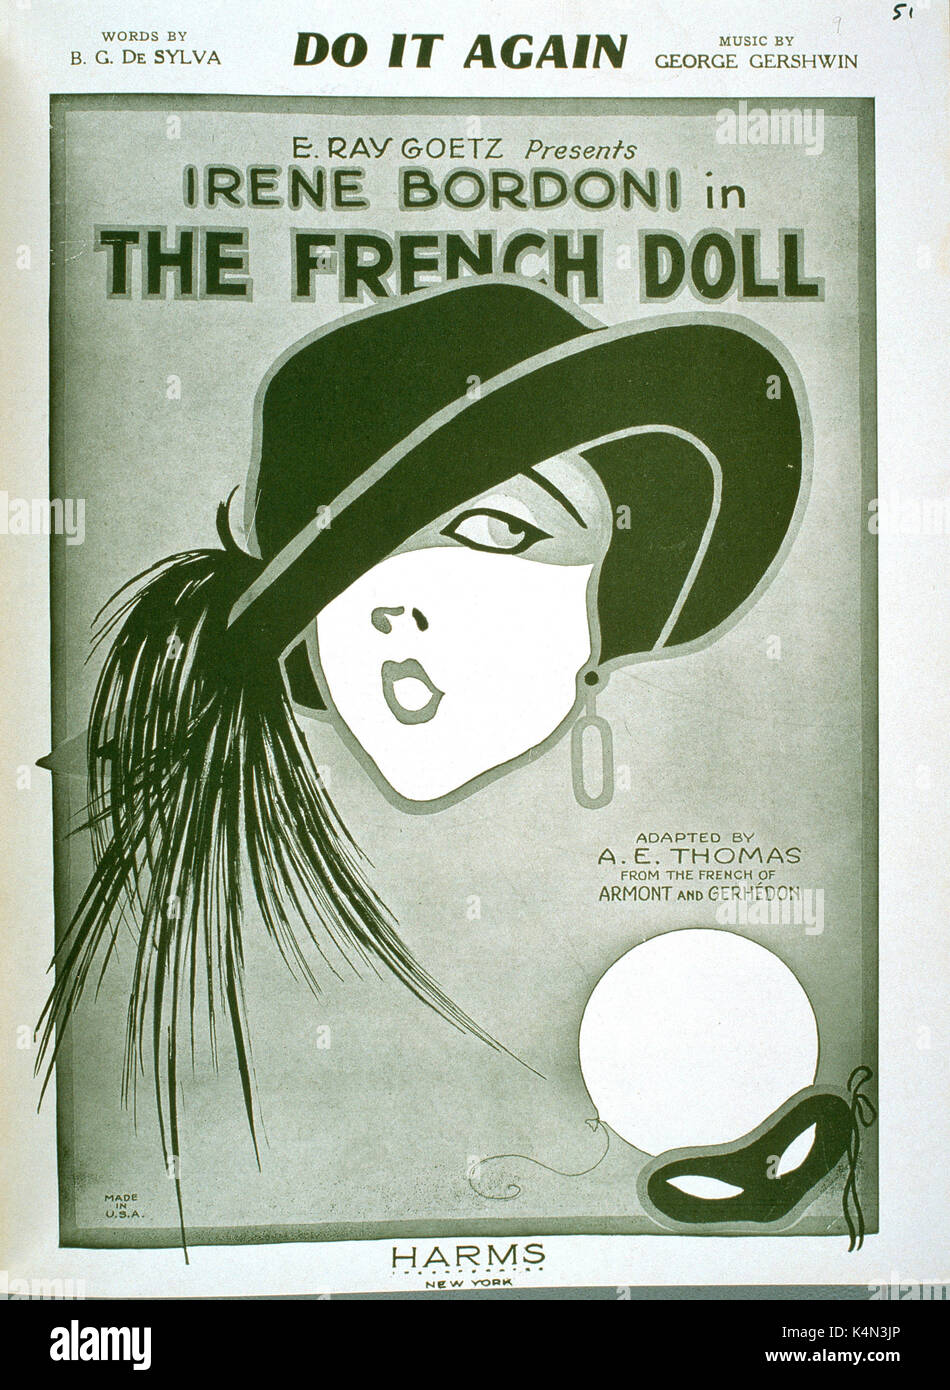 George Gershwin's 'Do It Again' score cover. Song from 'The French Doll' starring Irene Bordoni (Singer and Dancer, 1895-1953).  American composer and pianist (1898-1937). Stock Photo